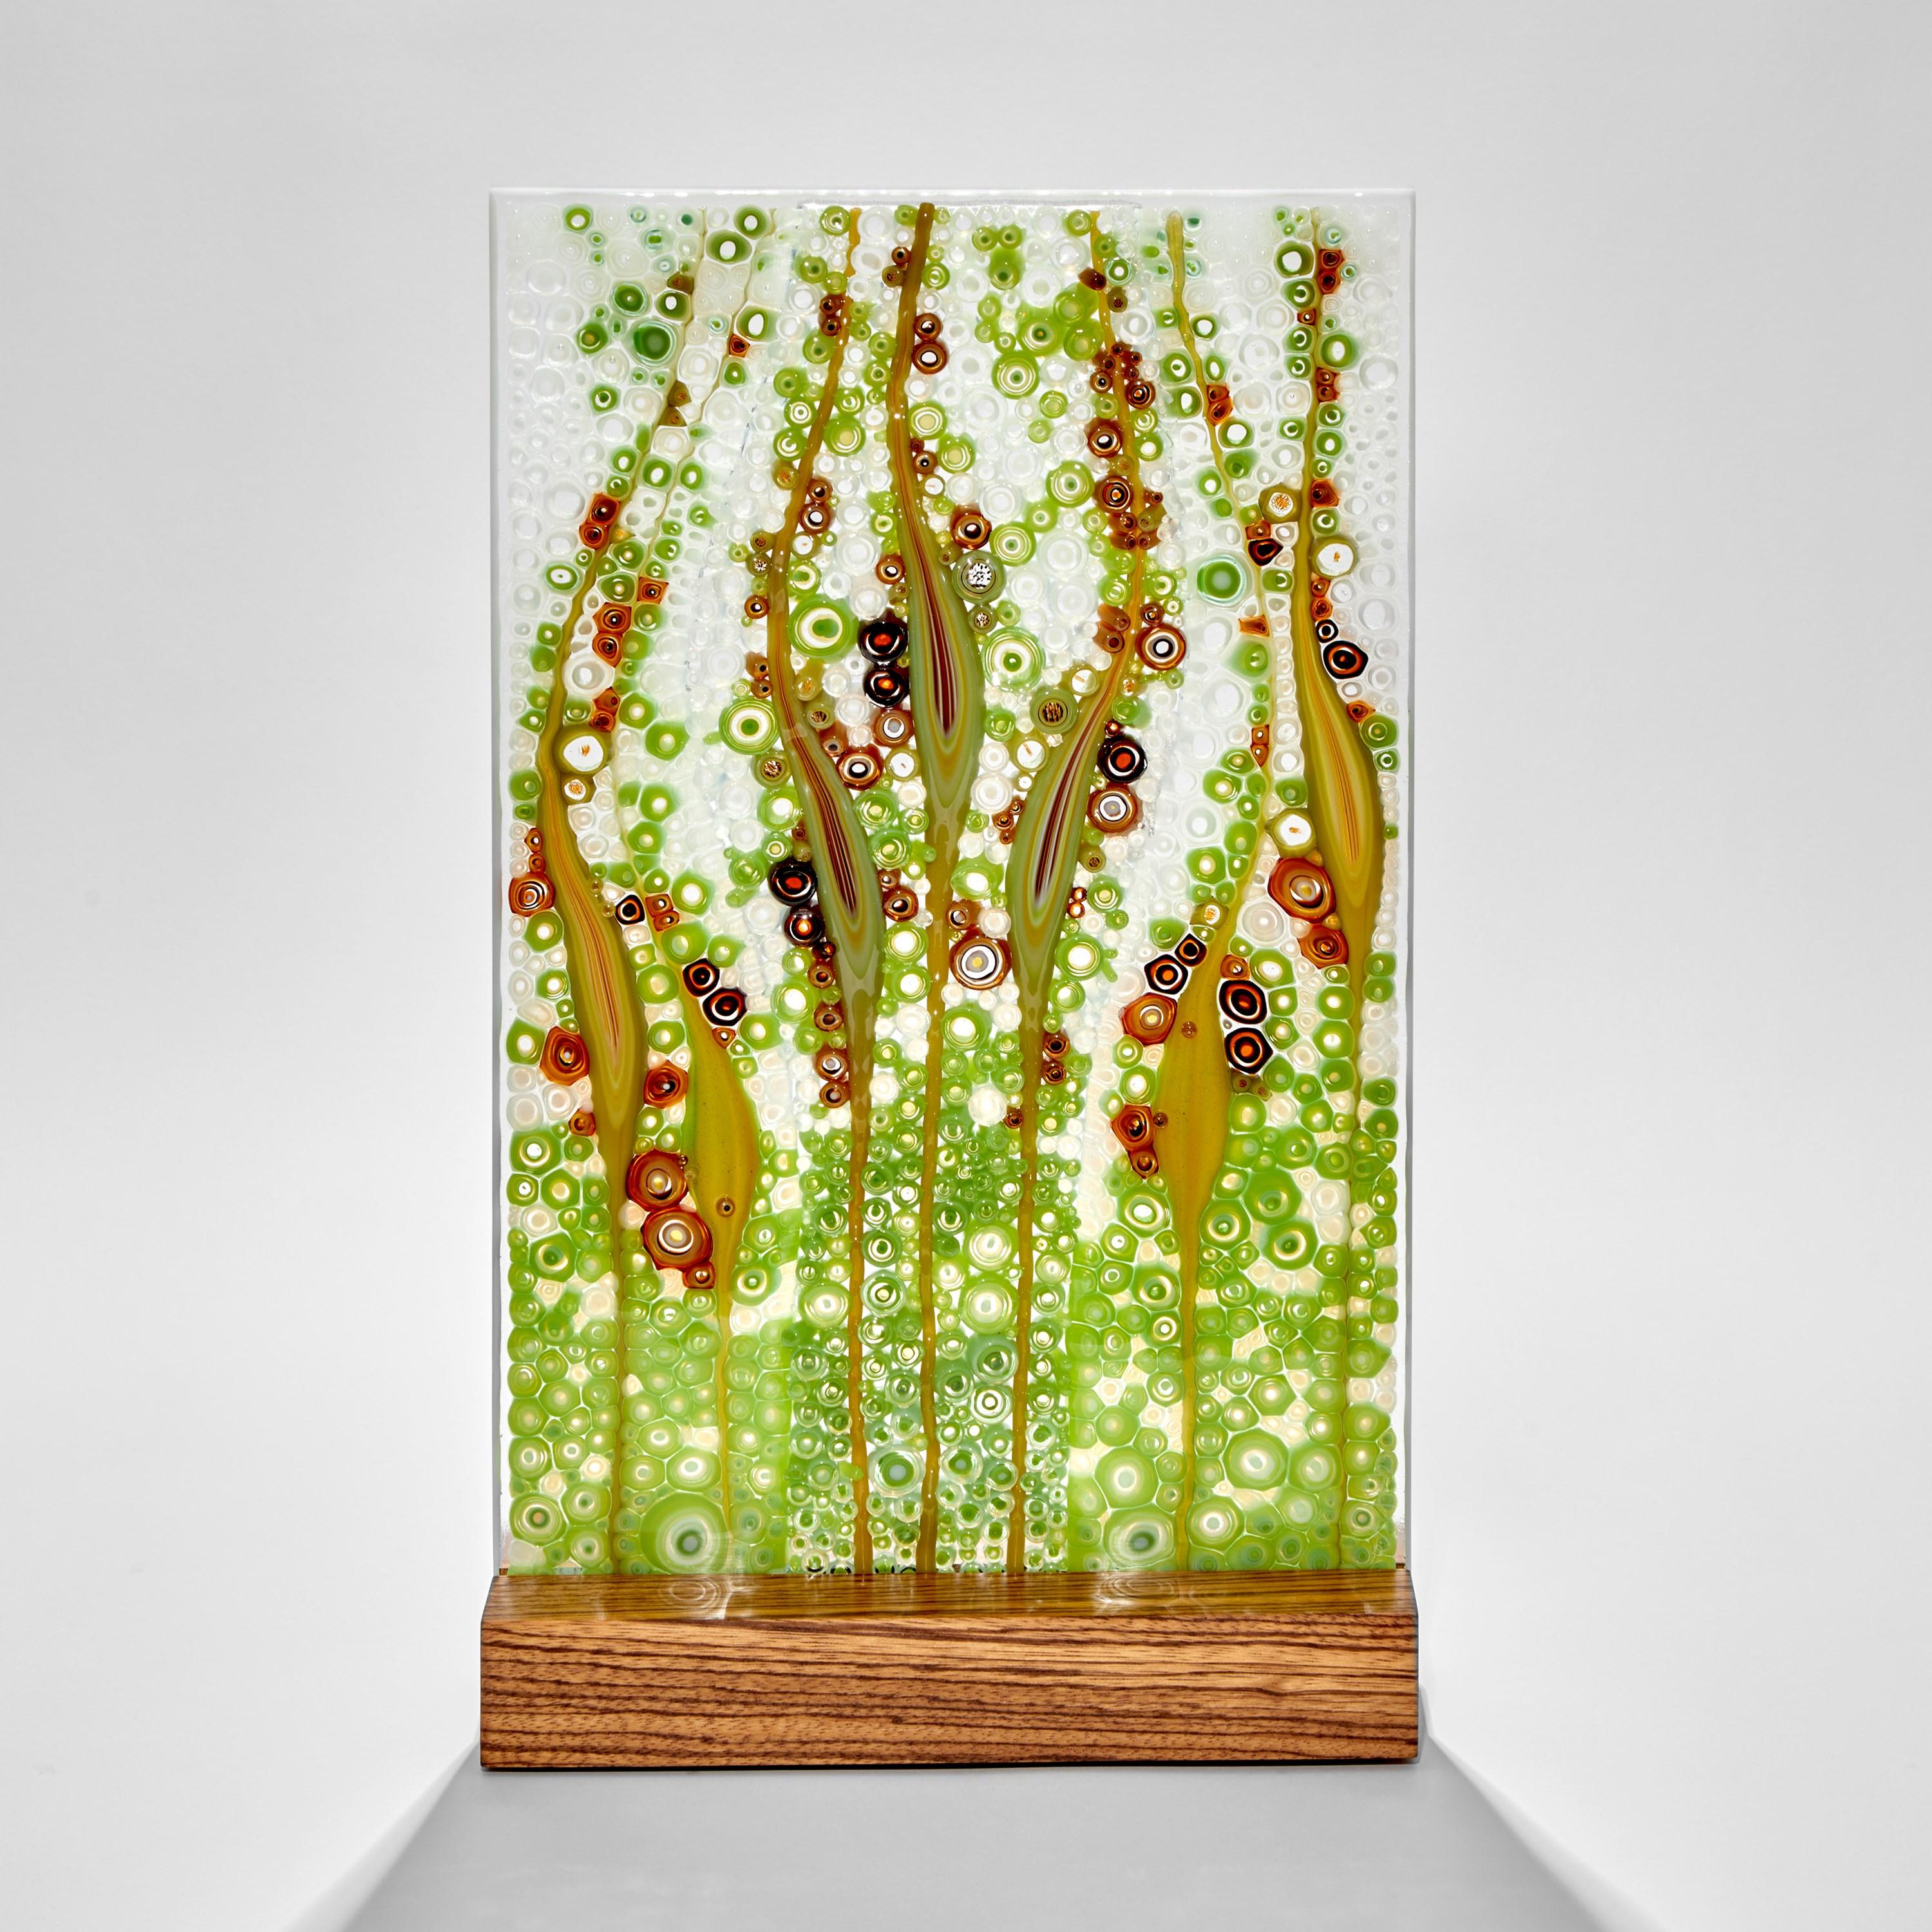 'Fairytales & Legends', is a unique green, red and white glass sculpture with zebrano wood base by the Austrian artist Sandra A. Fuchs. Fuchs creates her own multicolored and complex glass canes, which are then cut to create small 'murrina'. These